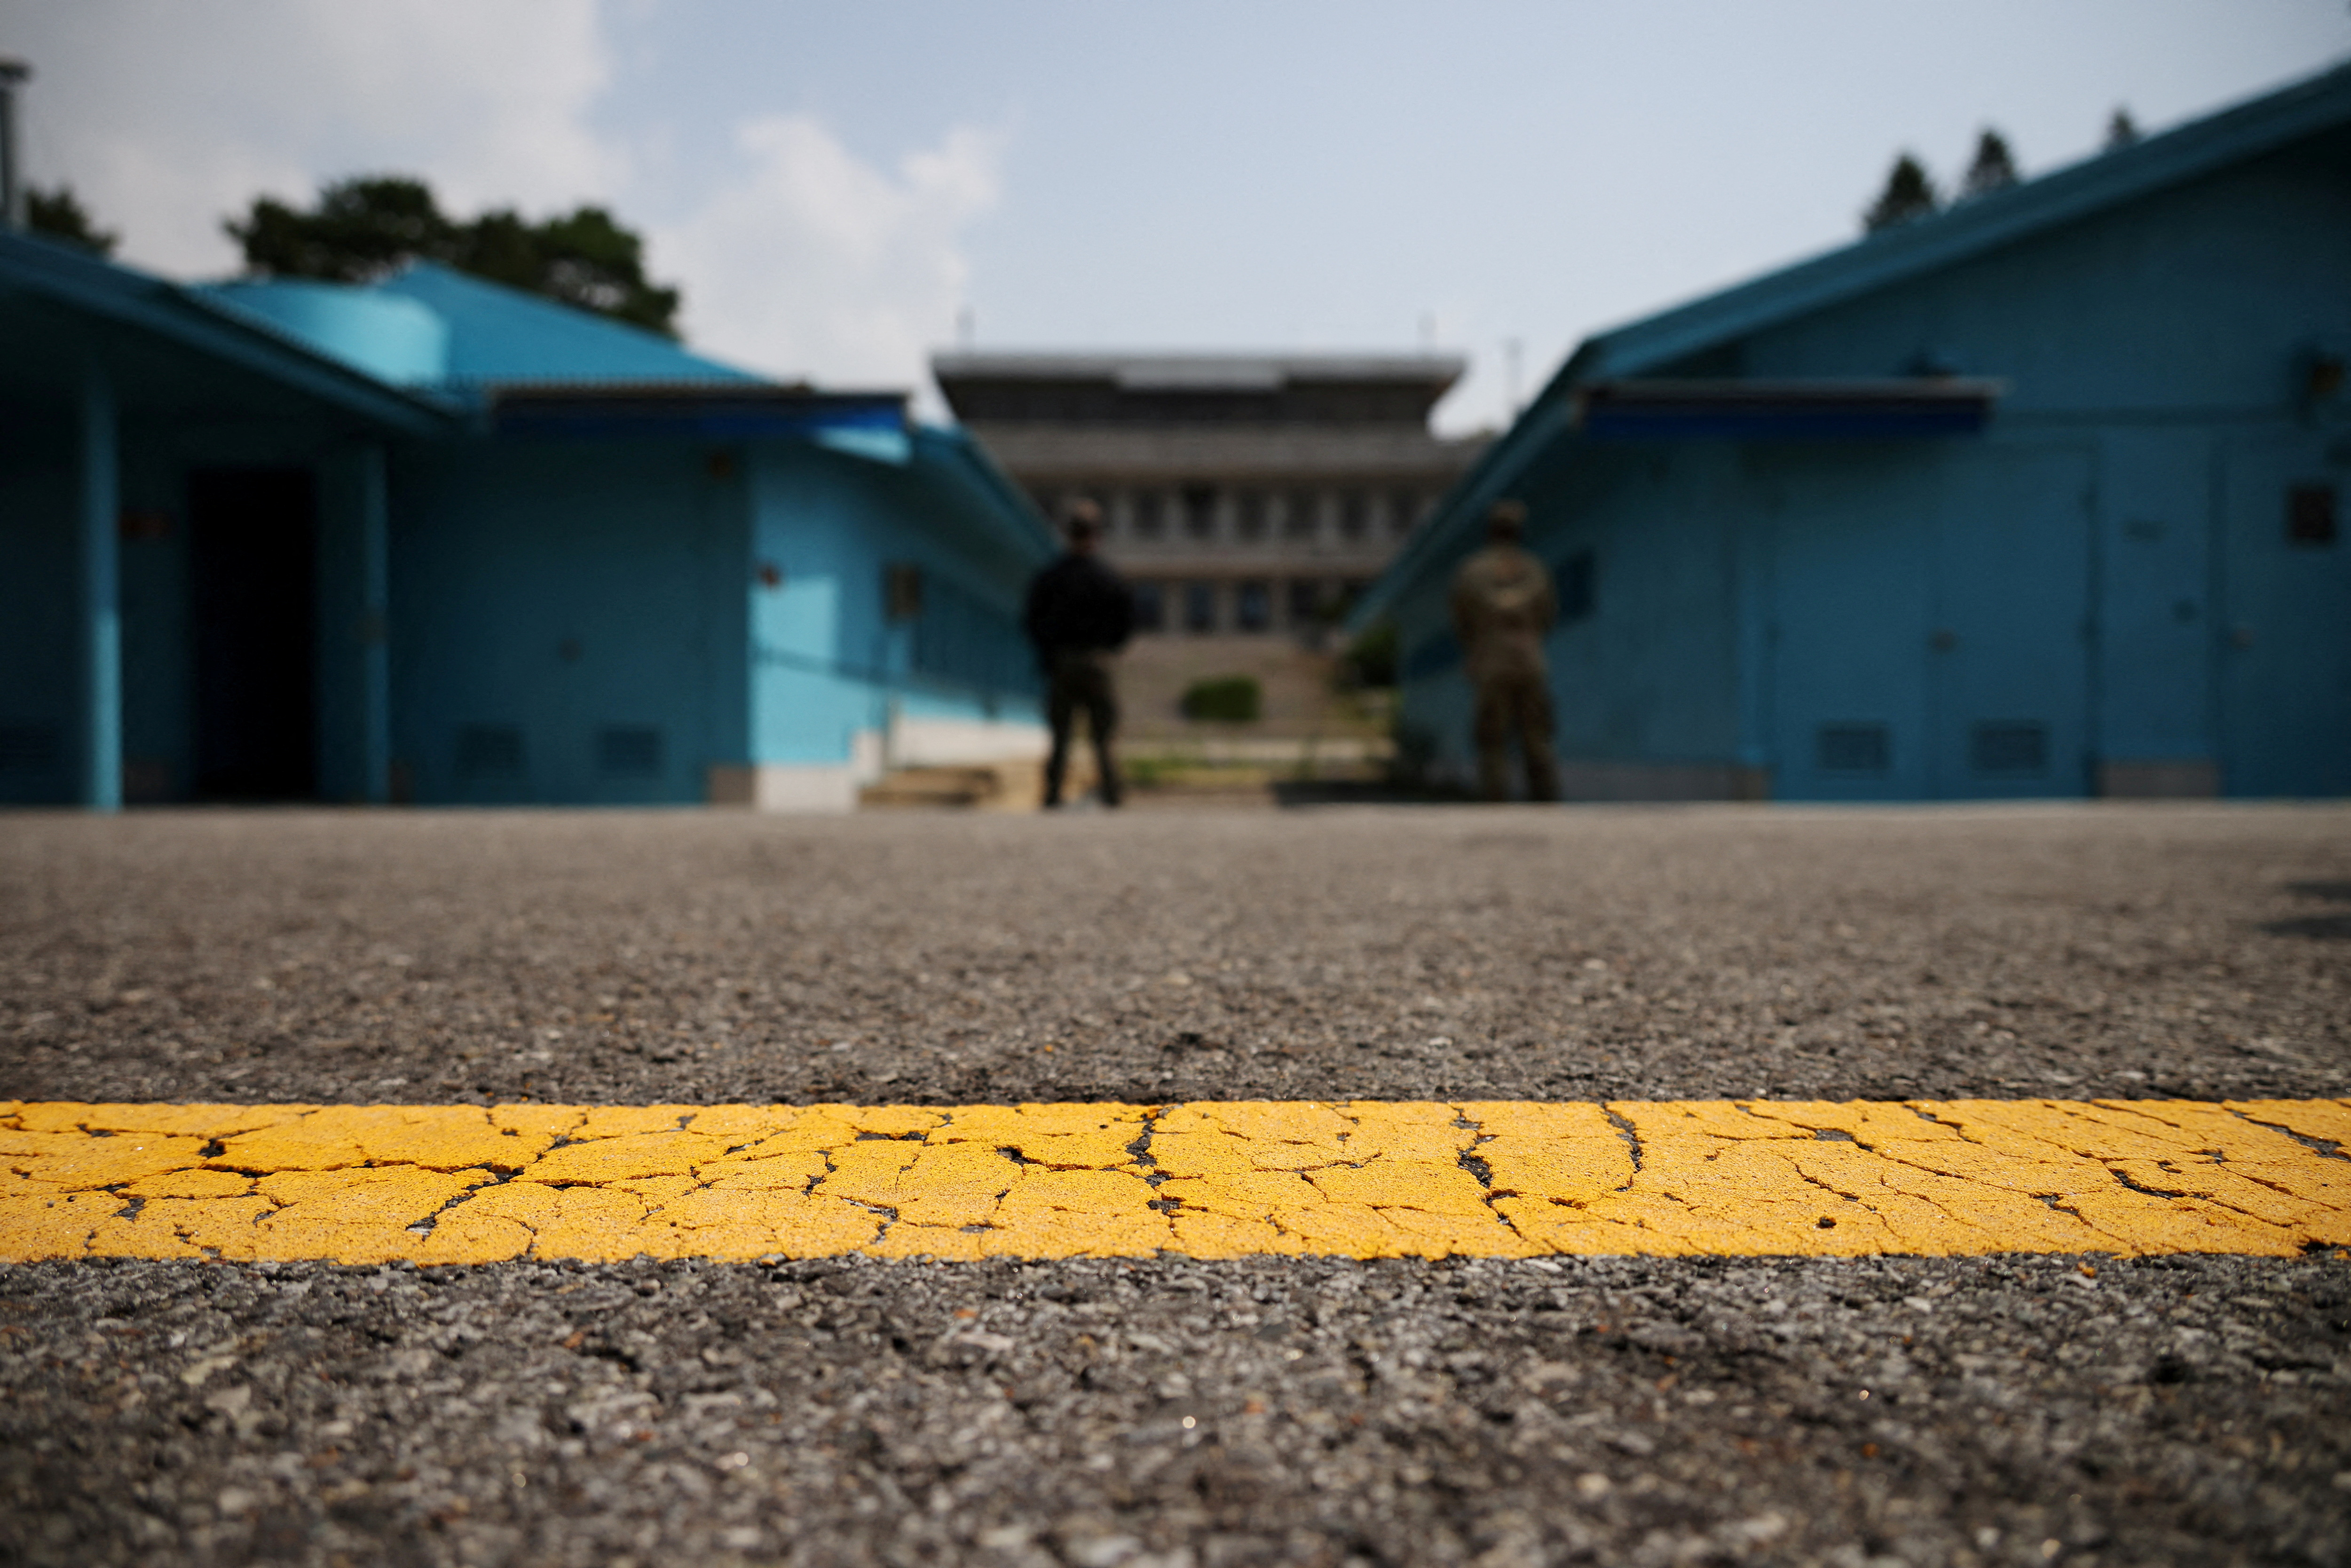 The truce village of Panmunjom inside the demilitarized zone (DMZ) separating the two Koreas